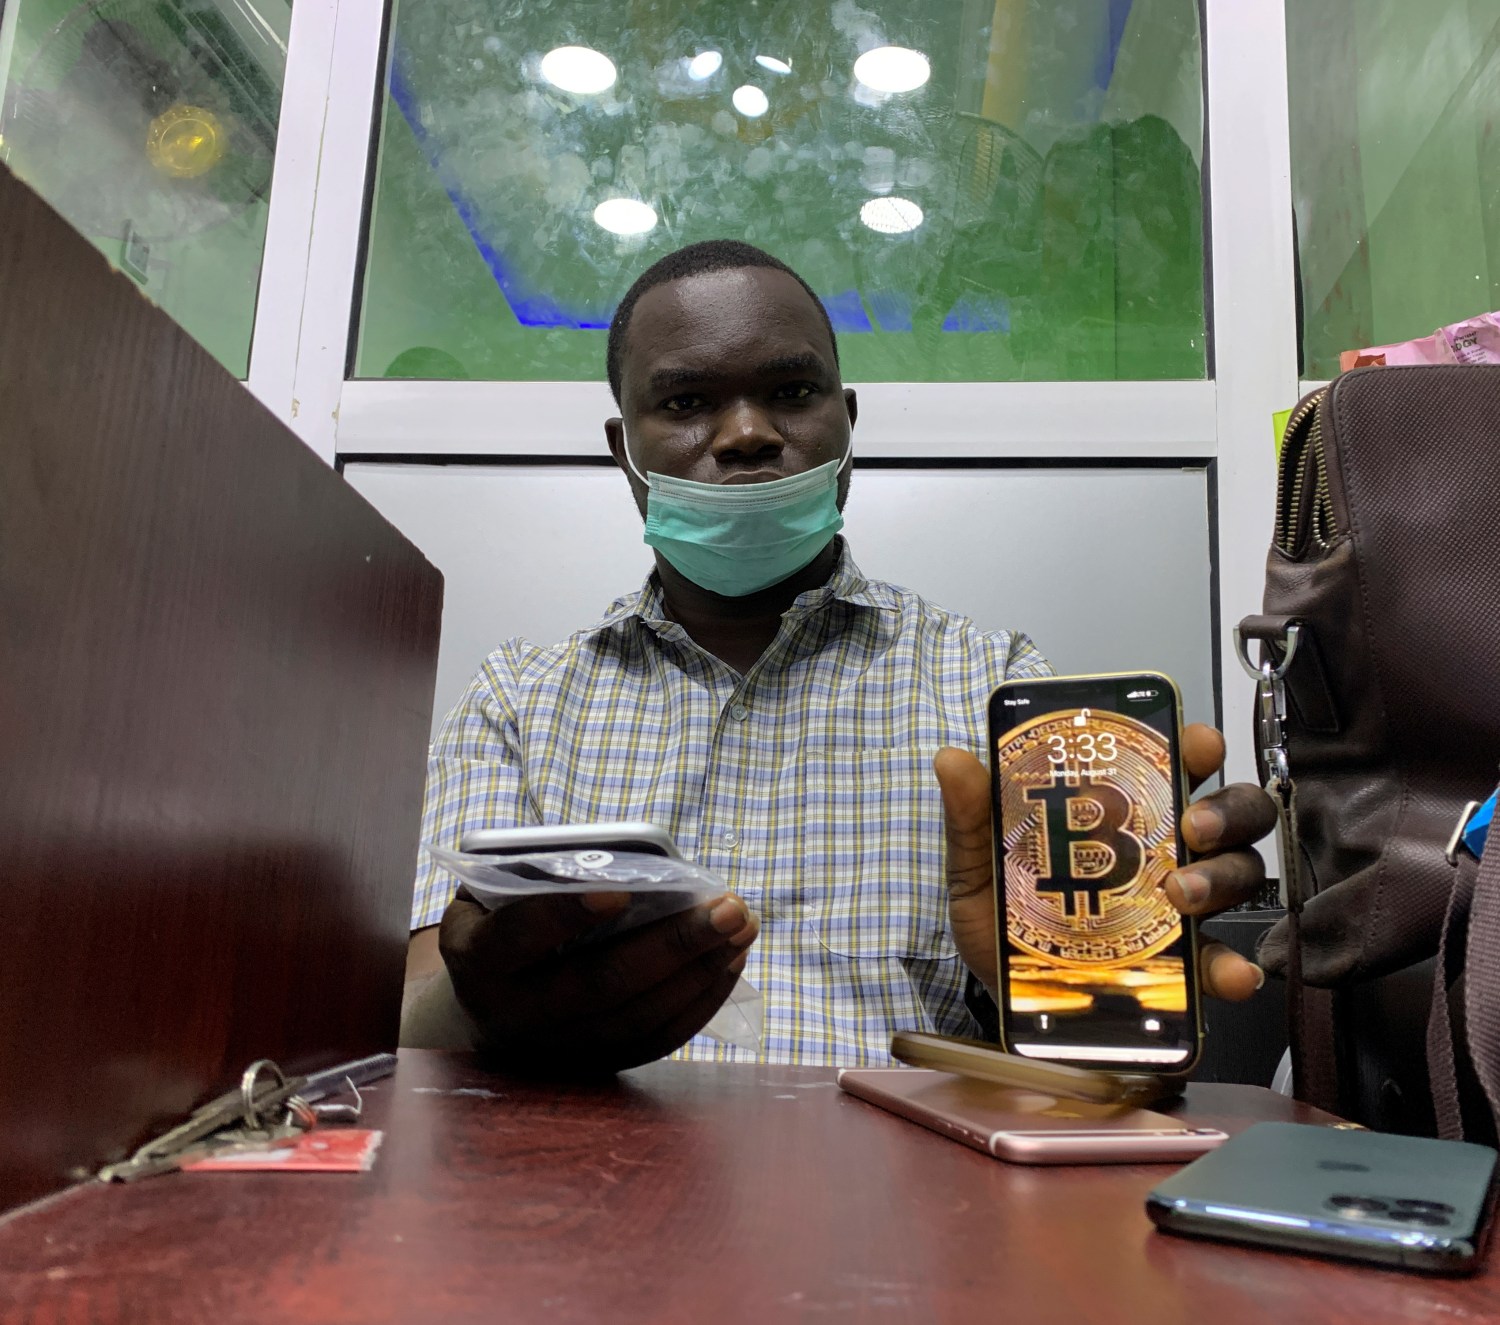 Abolaji Odunjo, a gadget vendor who trades with bitcoin, poses with his mobile phone after an interview with Reuters, at his store at the "Computer Village" in Lagos, Nigeria August 31, 2020. Picture taken in August 31, 2020. REUTERS/Temilade Adelaja